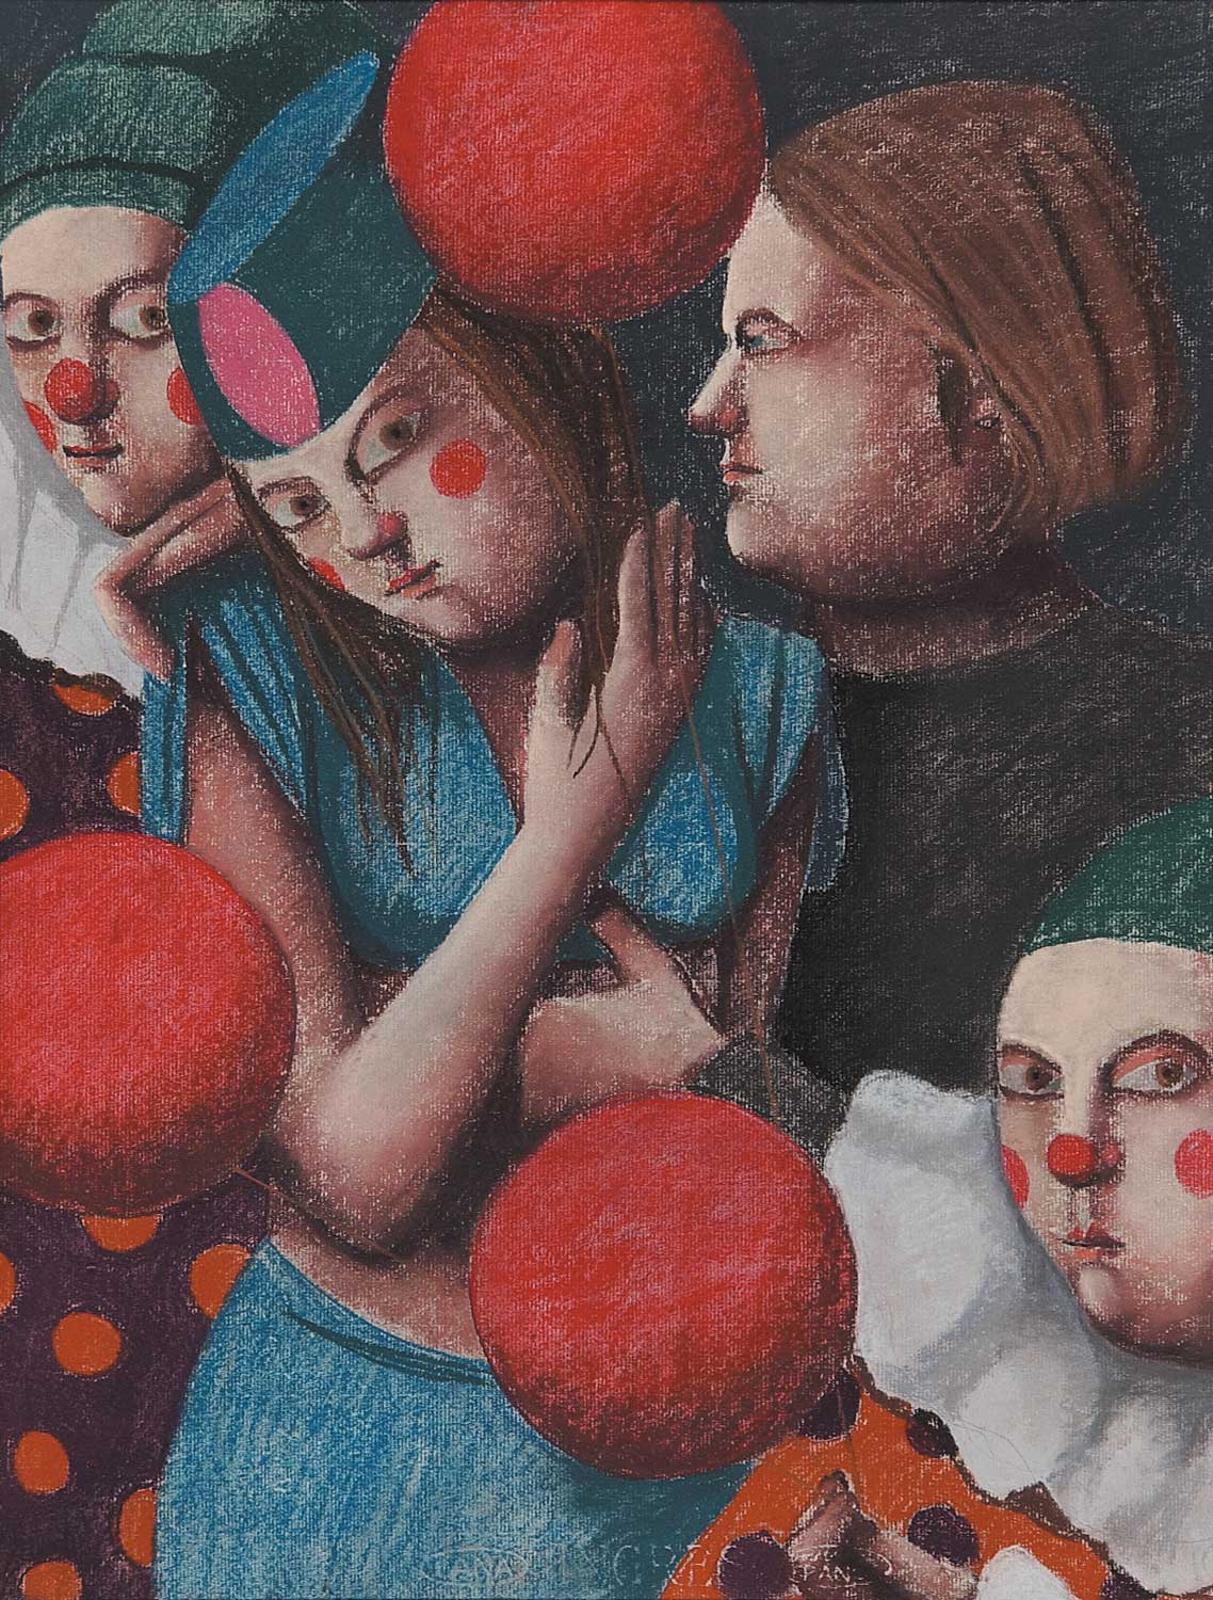 Atributted Louise Scott - Untitled - Balloons and Clowns